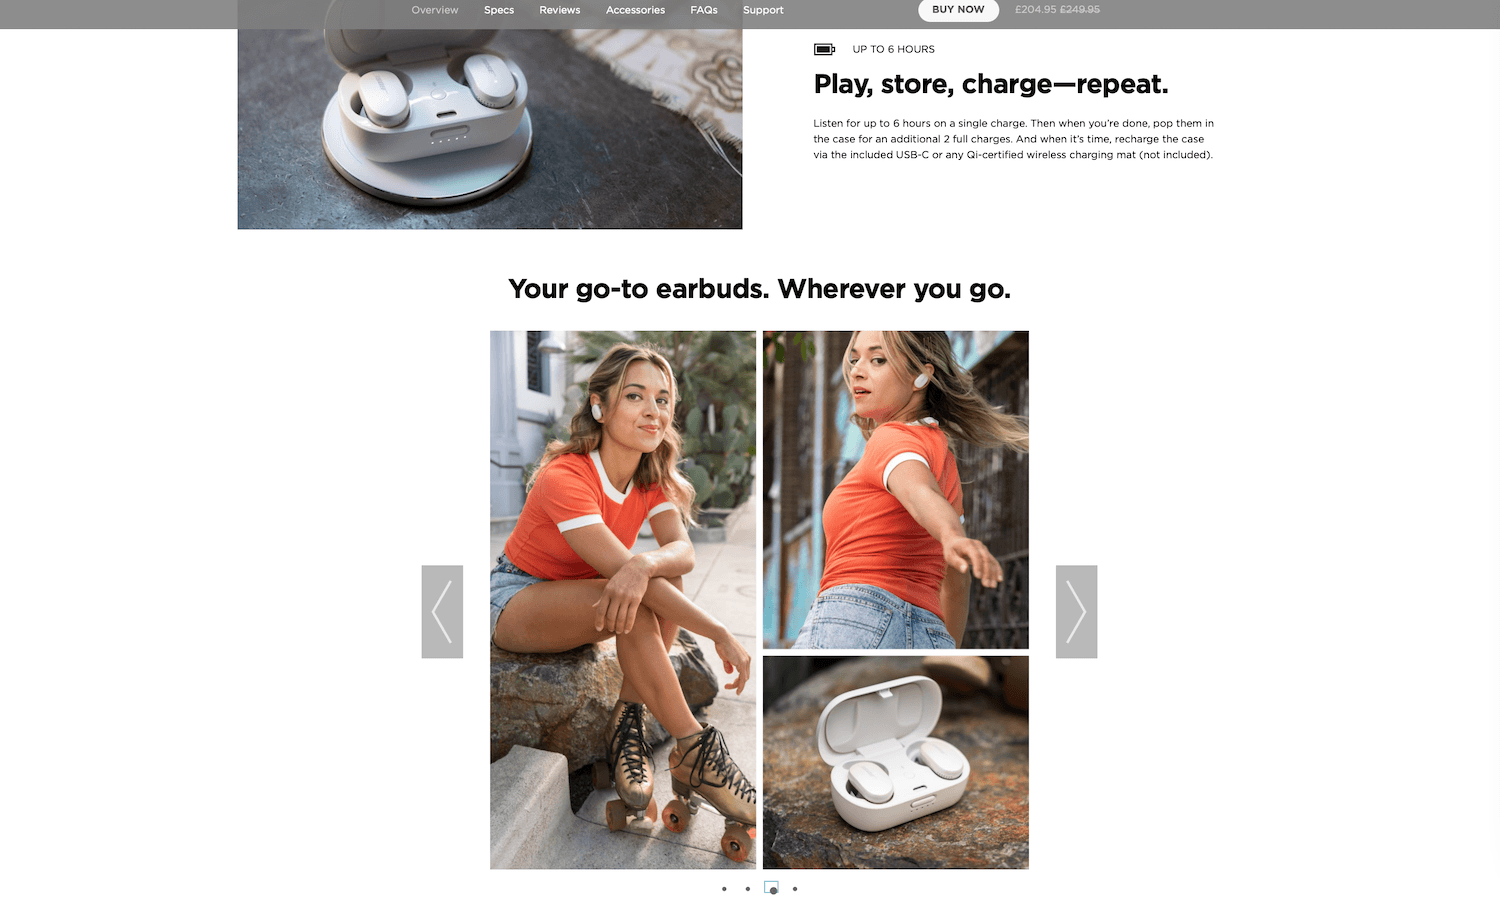 Bose showcases social media feeds on their product pages alongside technical details, helping customers imagine how the product will fit into their life by showing inspiring images of real people using the item.